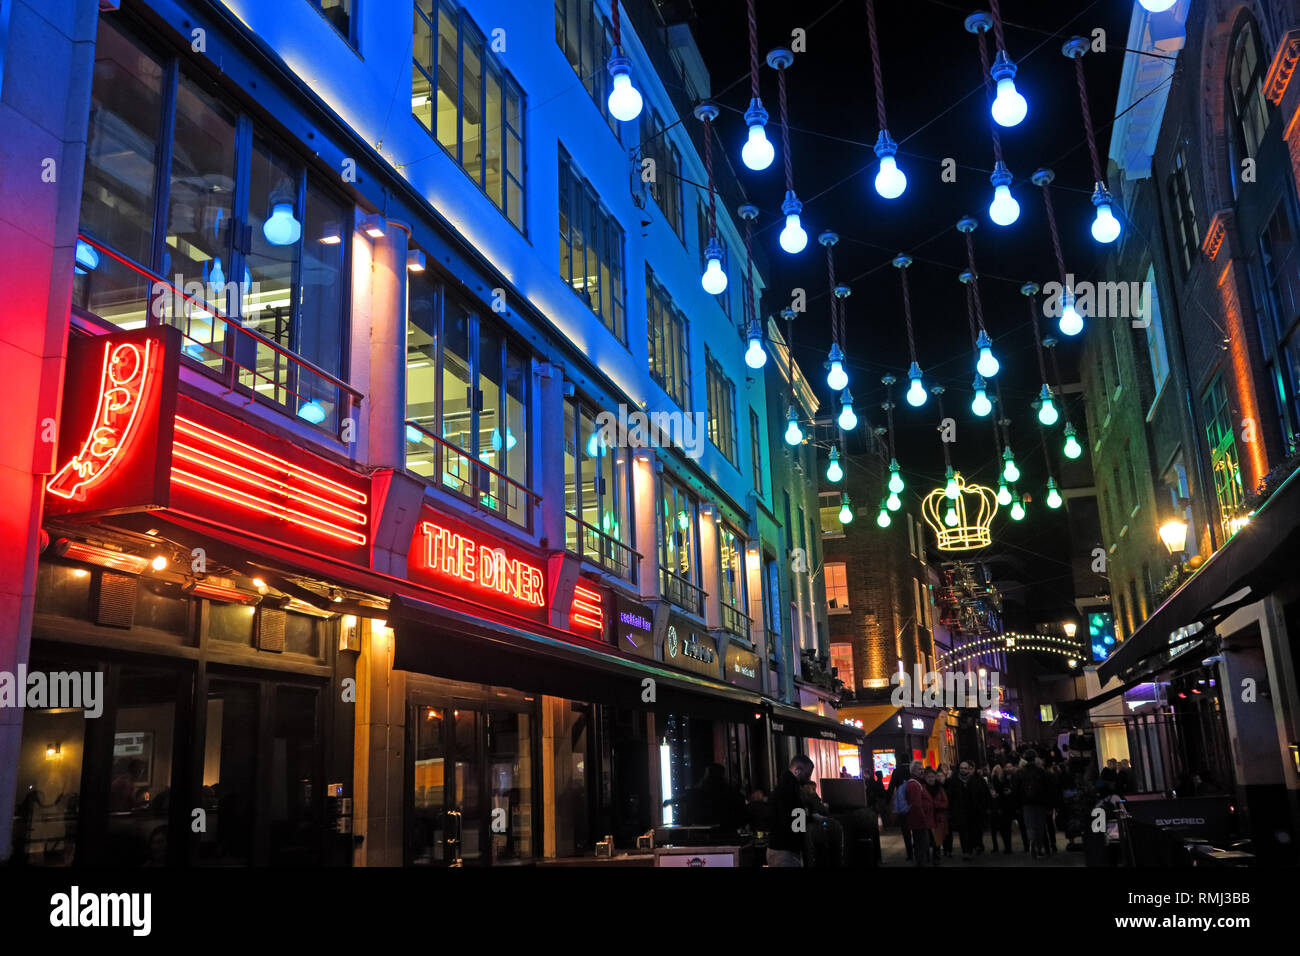 Carnaby Street, City of Westminster, Londra, Inghilterra, Regno Unito, W1F 9PS Foto Stock